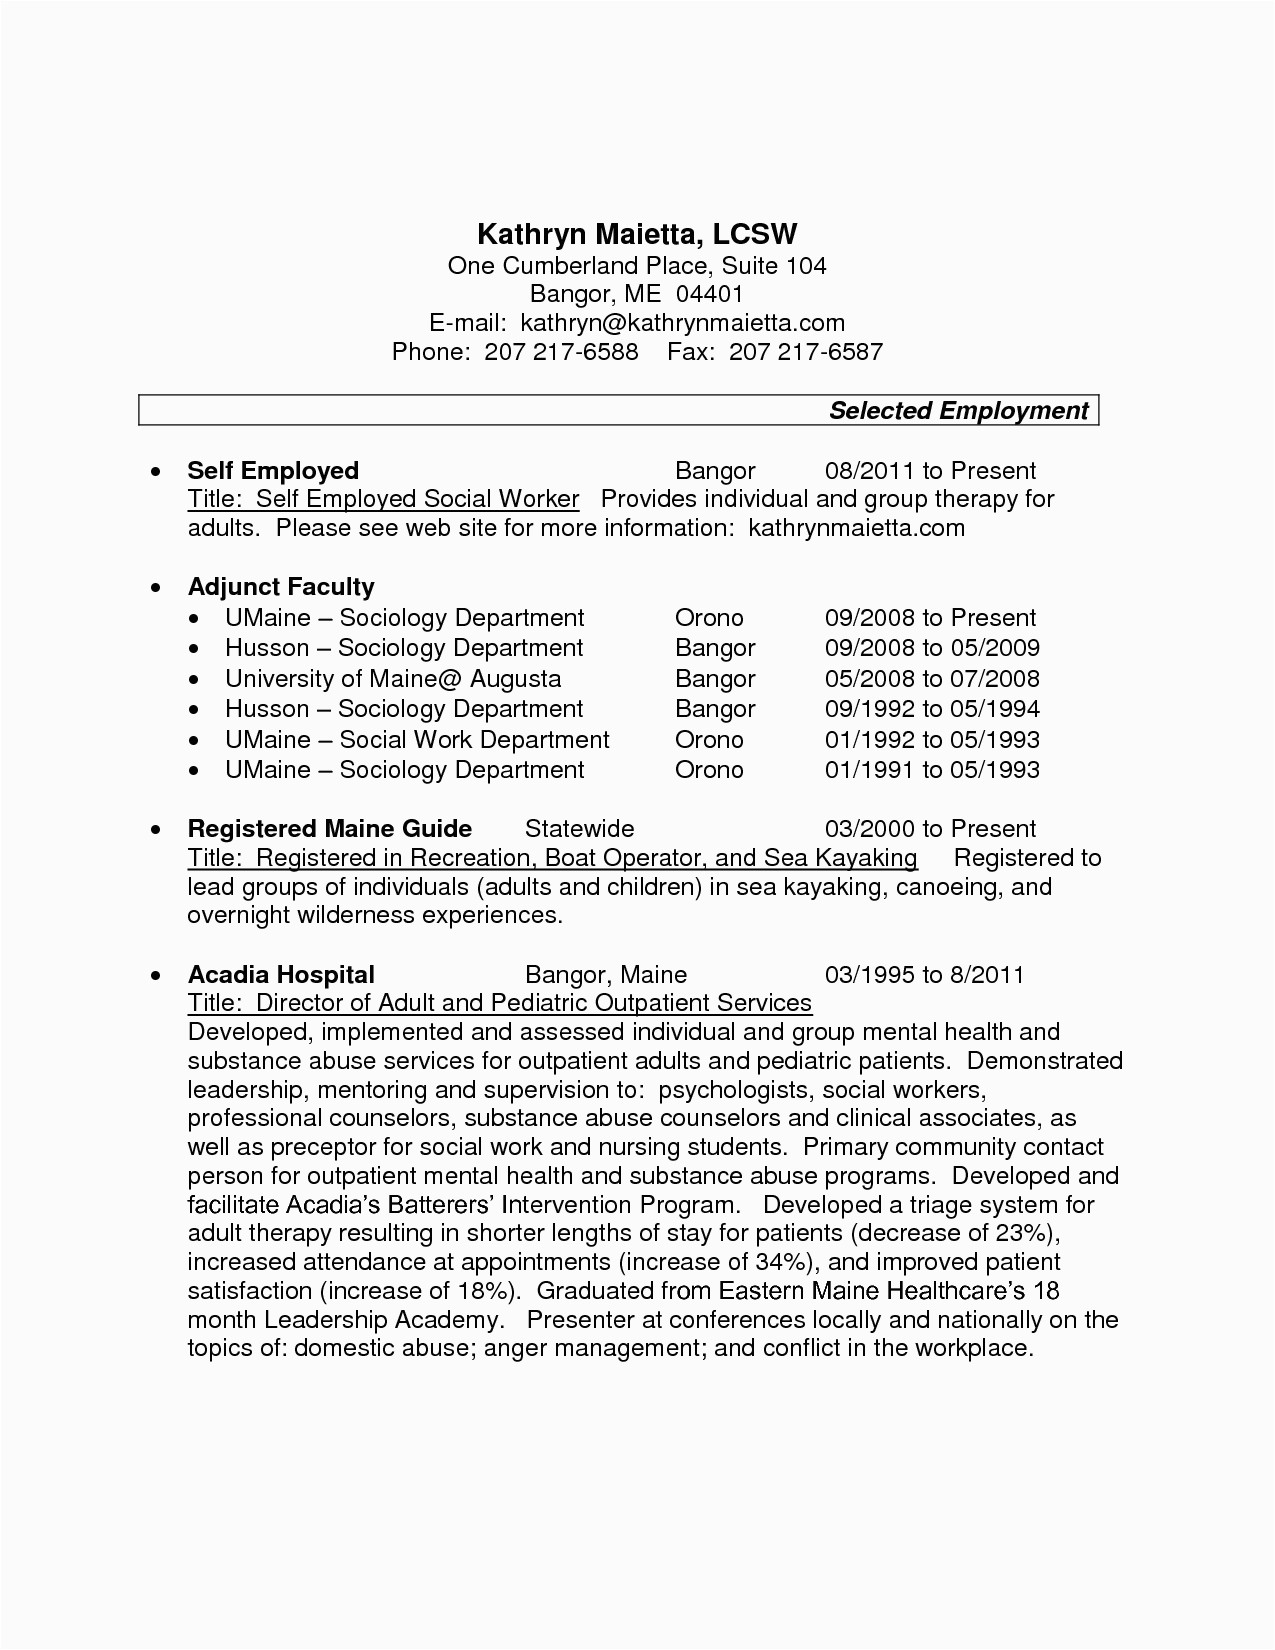 Sample Resume Of Self Employed Person Resume Examples for Self Employed Person You Can Make